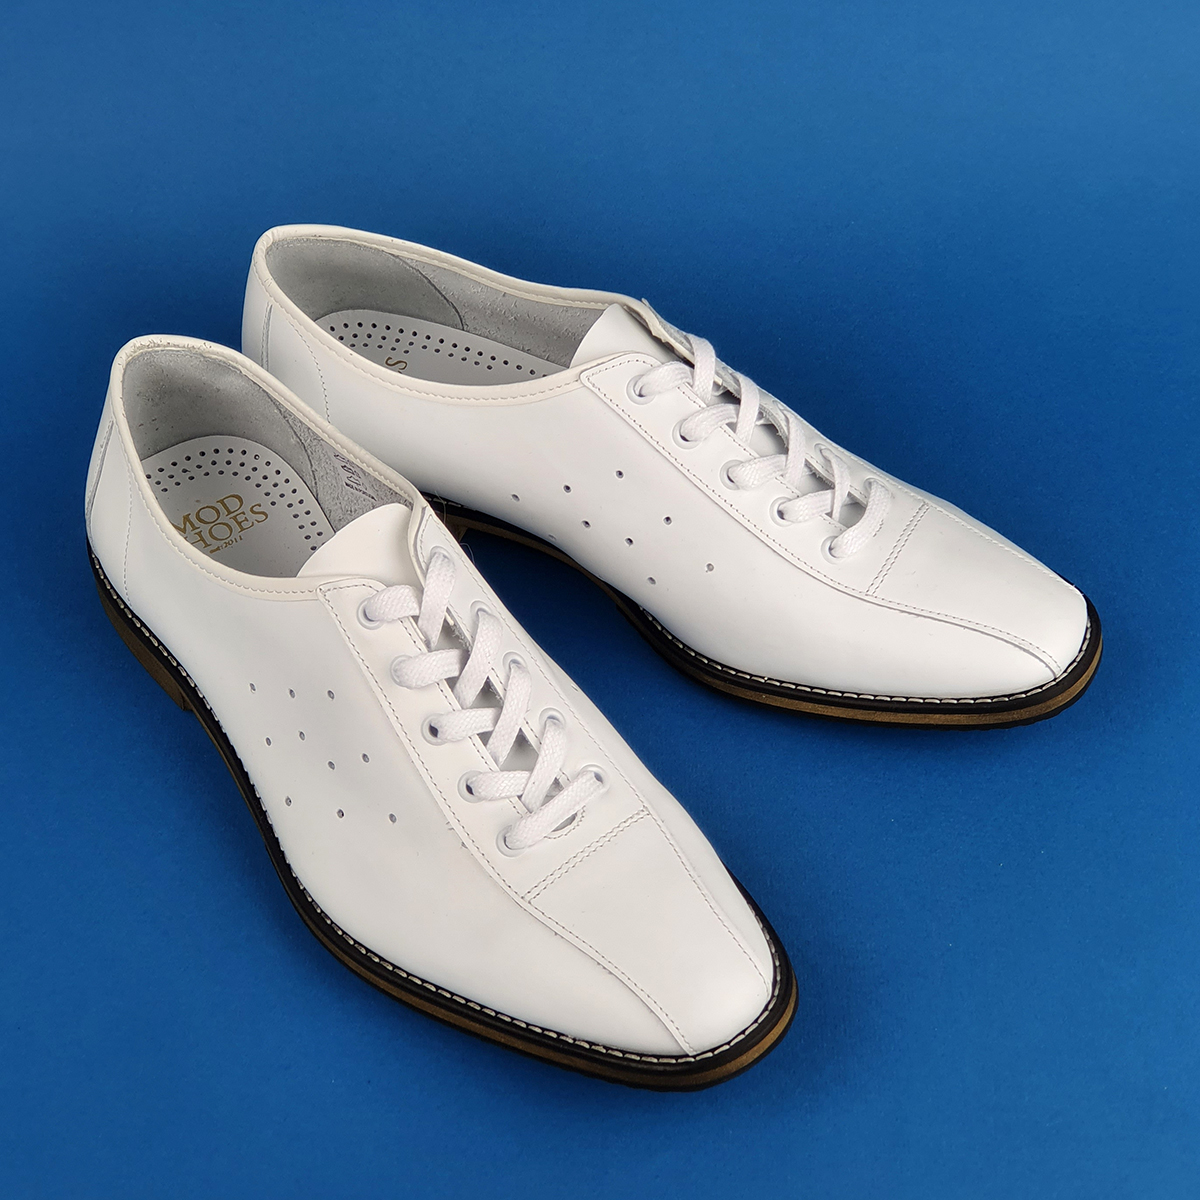 Modshoes All White Bowling Mod Style Chisel Bowling Shoes Paul Weller Jam 1980 81 82 03 